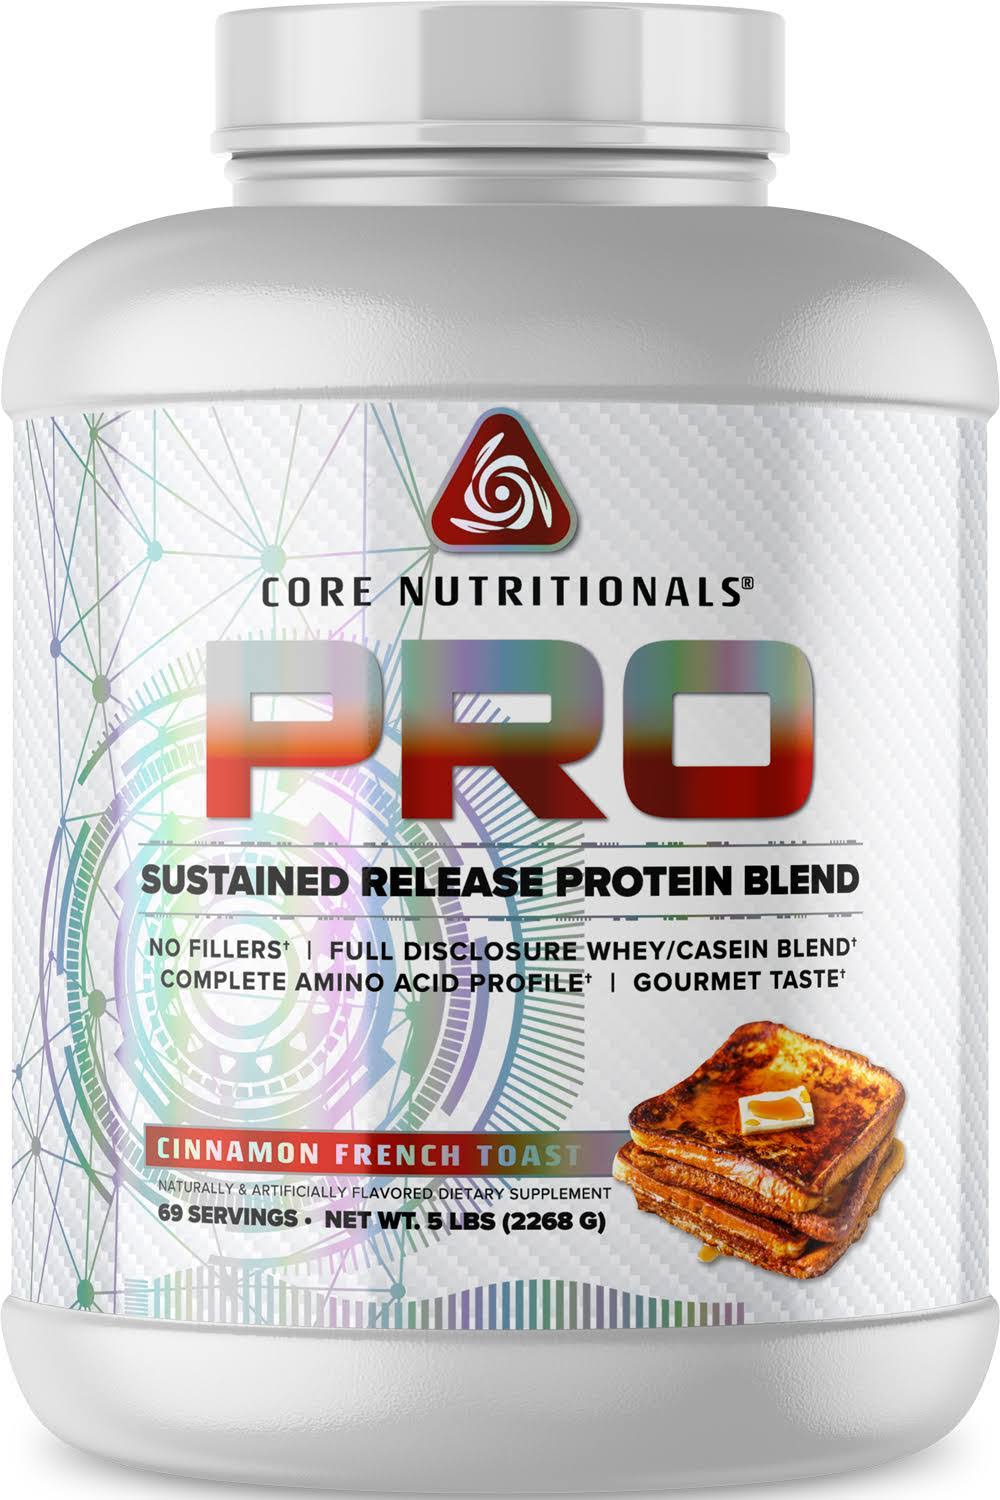 Core Nutritionals Core Pro Protein Blend Cinnamon French Toast / 5lb